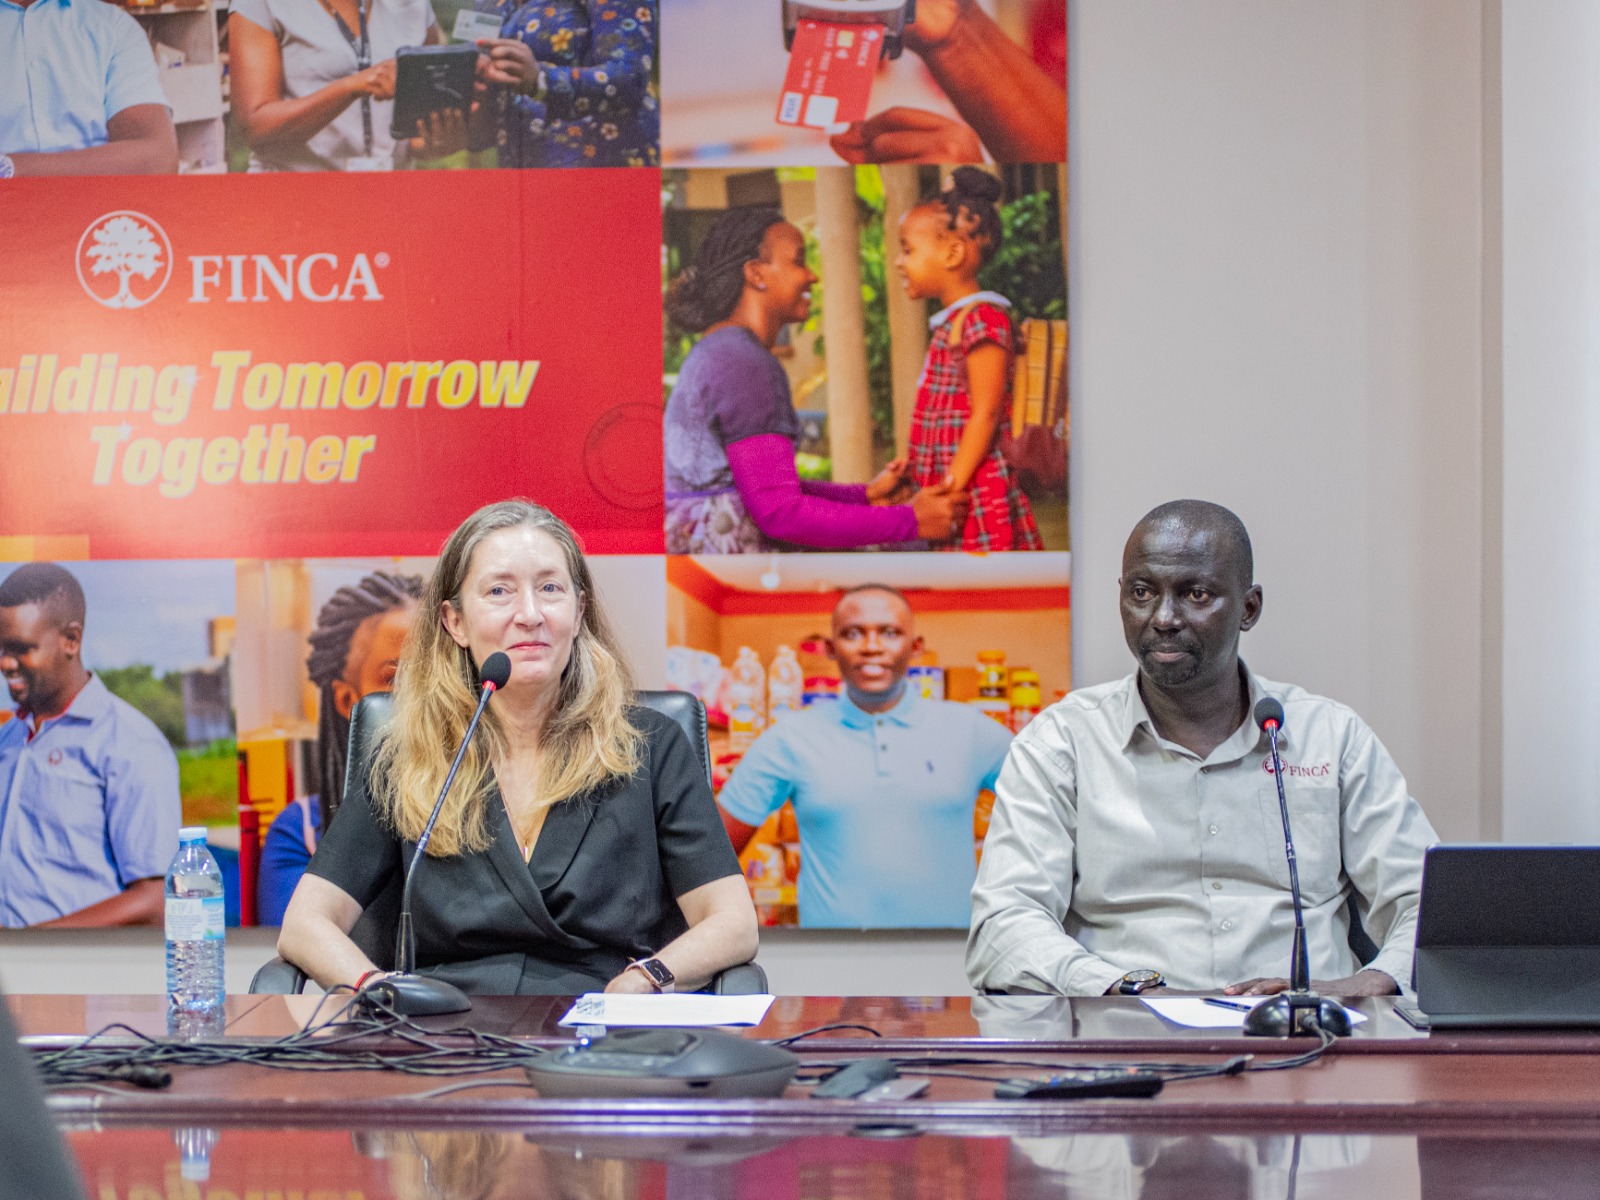 FINCA says it is broadening its approach to ending poverty in Uganda